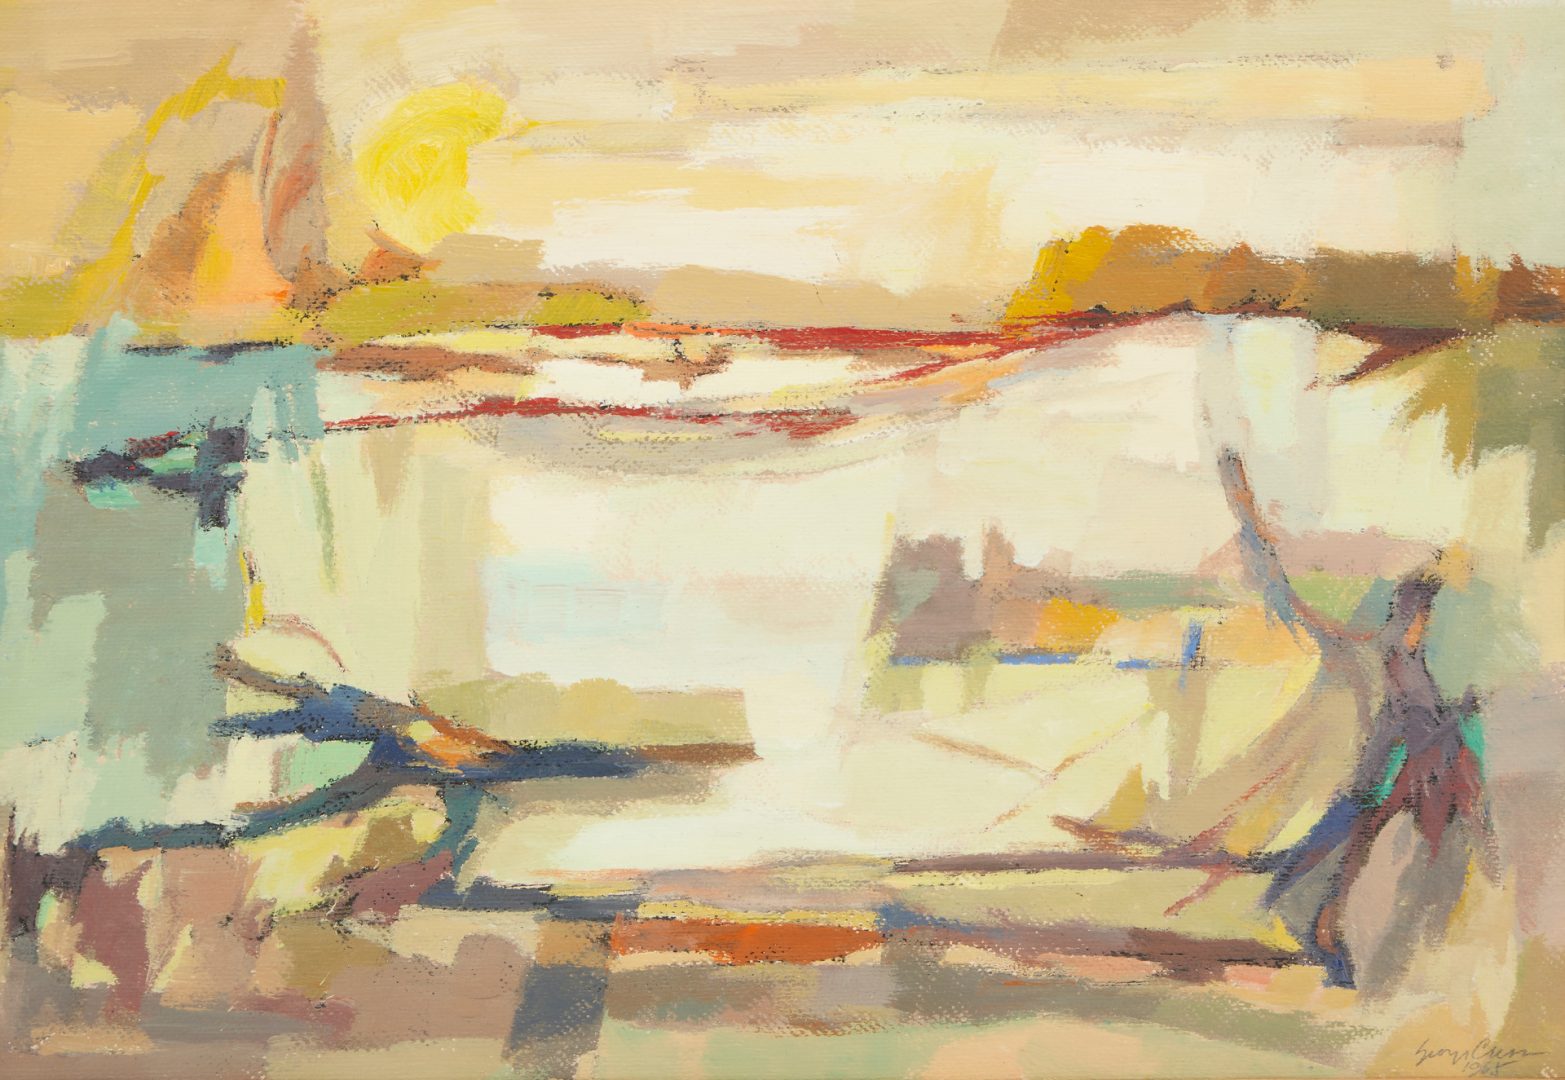 Lot 572: George Cress Abstract Landscape Painting, Inlet Sunrise No. 1